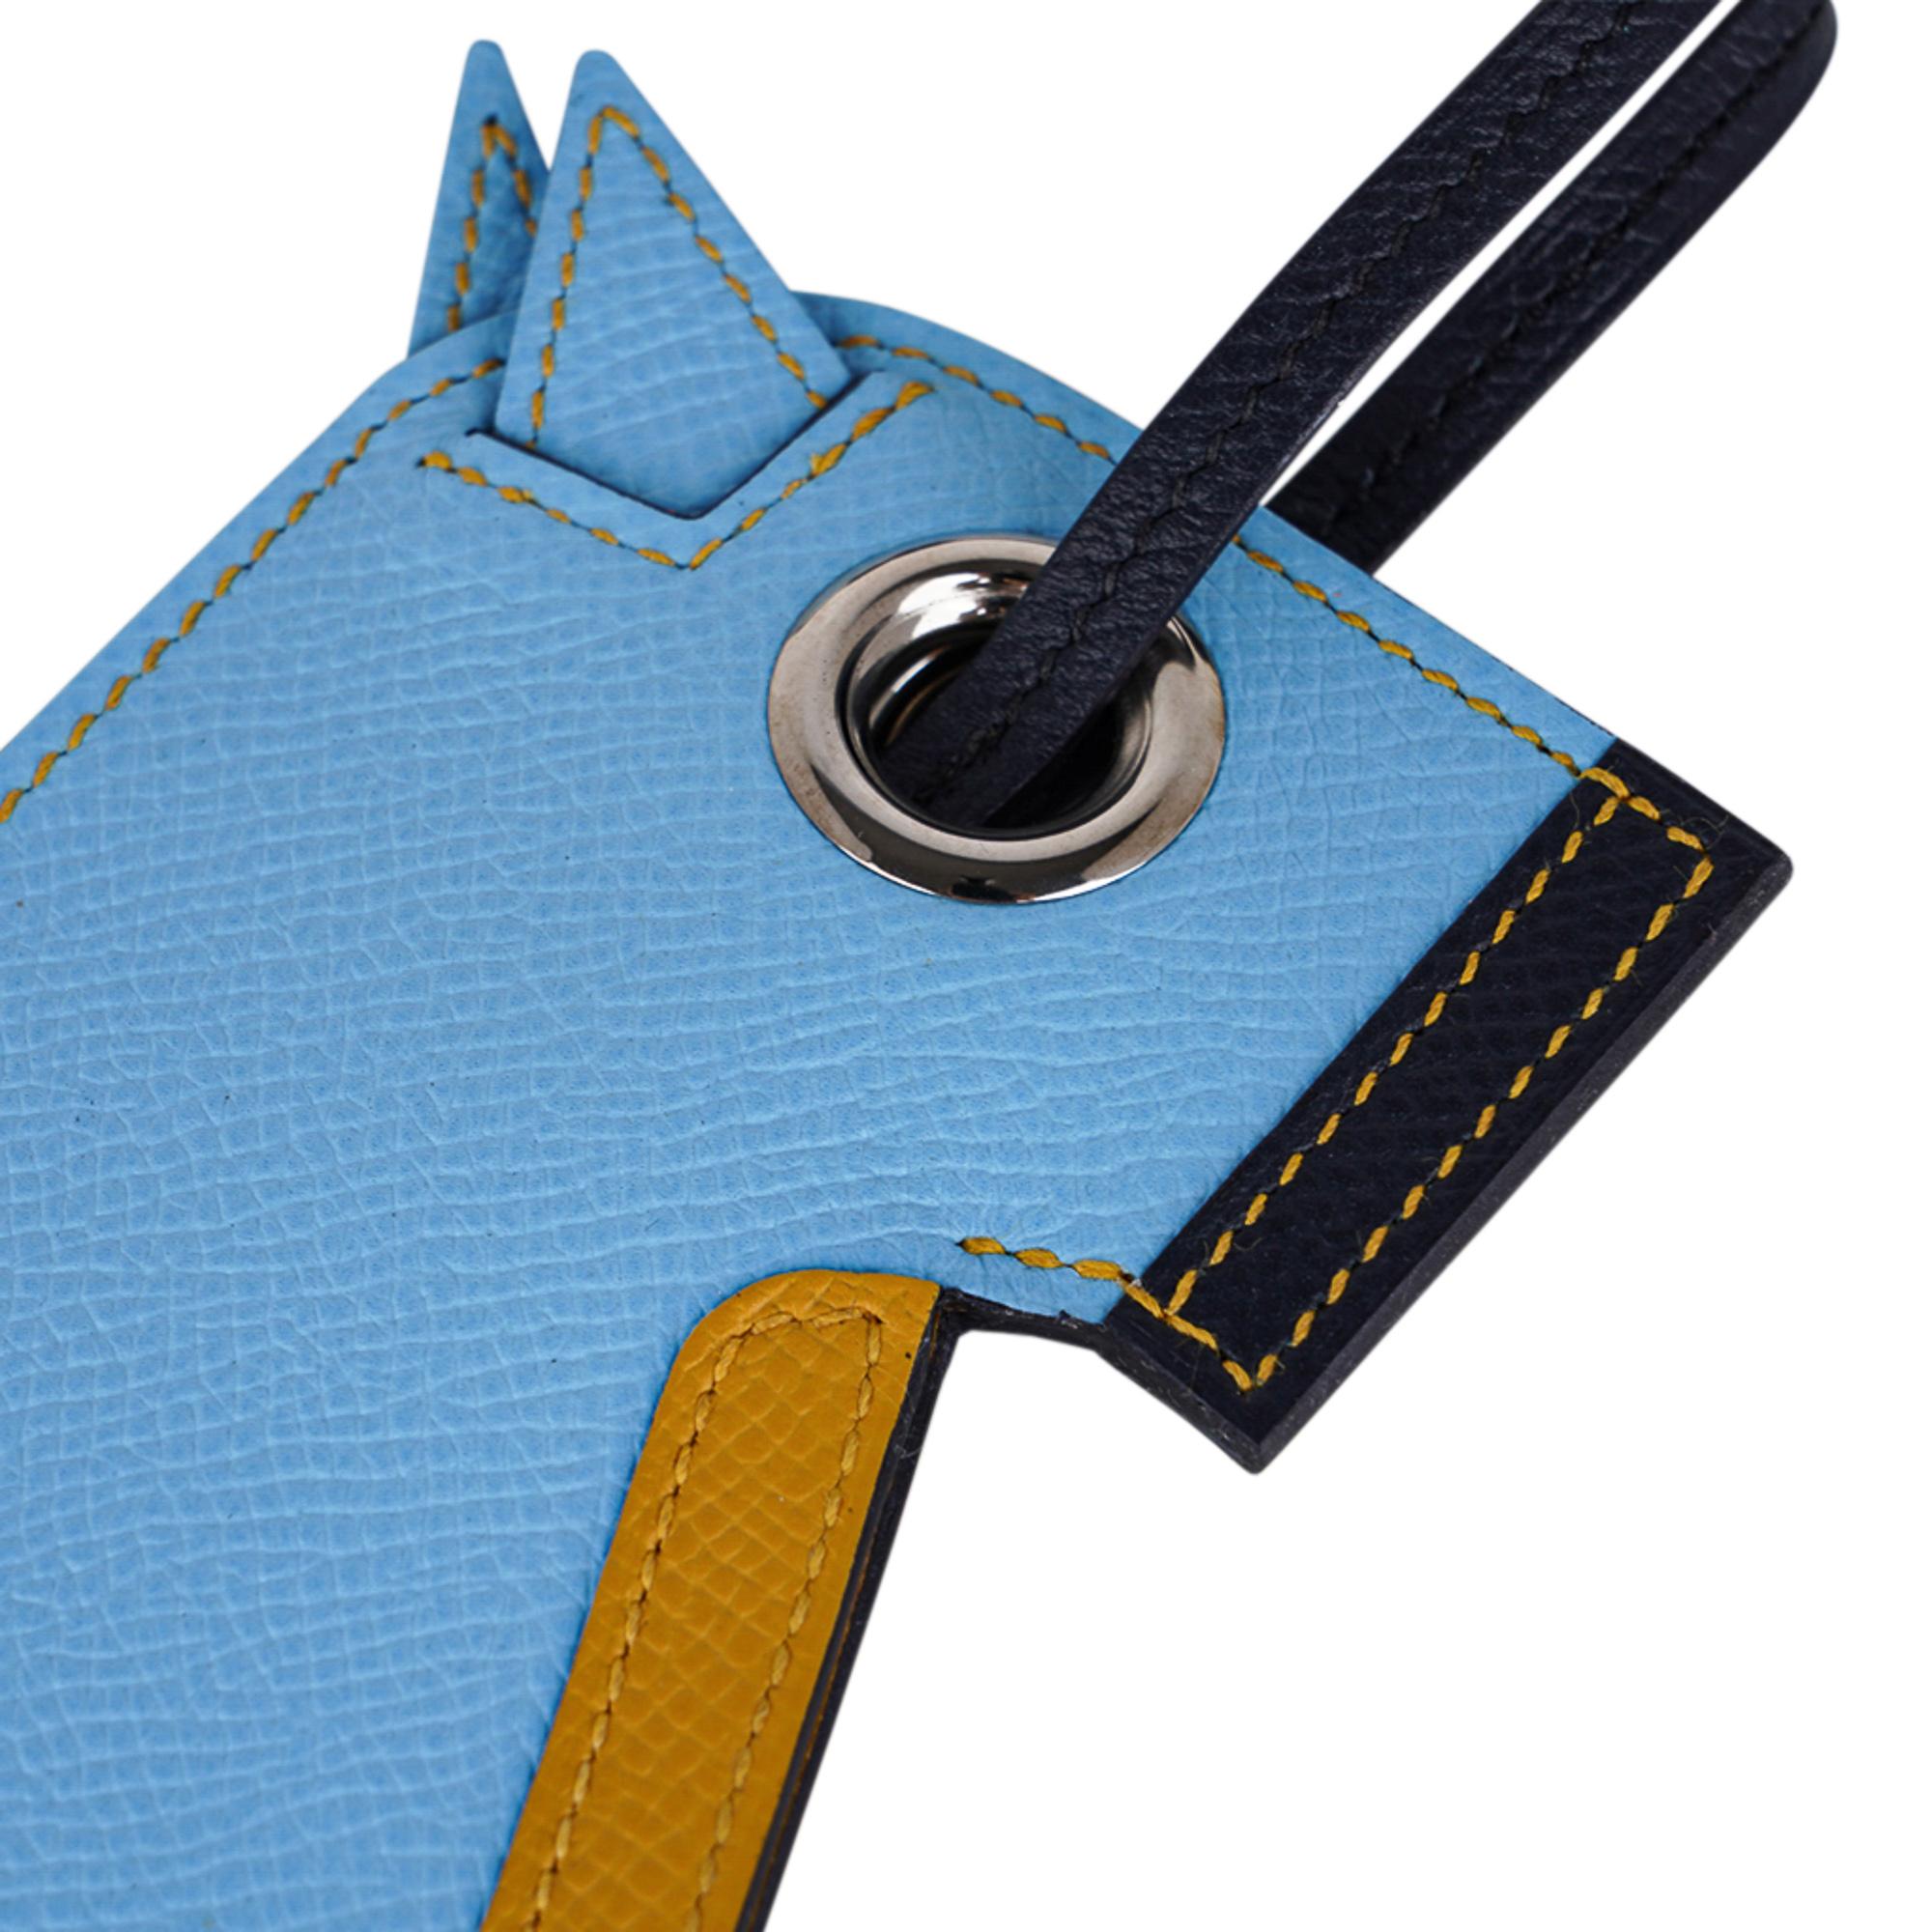 Mightychic offers a guaranteed authentic coveted Hermes Camail Key Ring featured in Bleu Celeste, Jaune Ambre and Blue Indigo.
A modern take on a horse head crafted in Epsom leather with a hidden key ring.
Charming and playful she easily adorns a